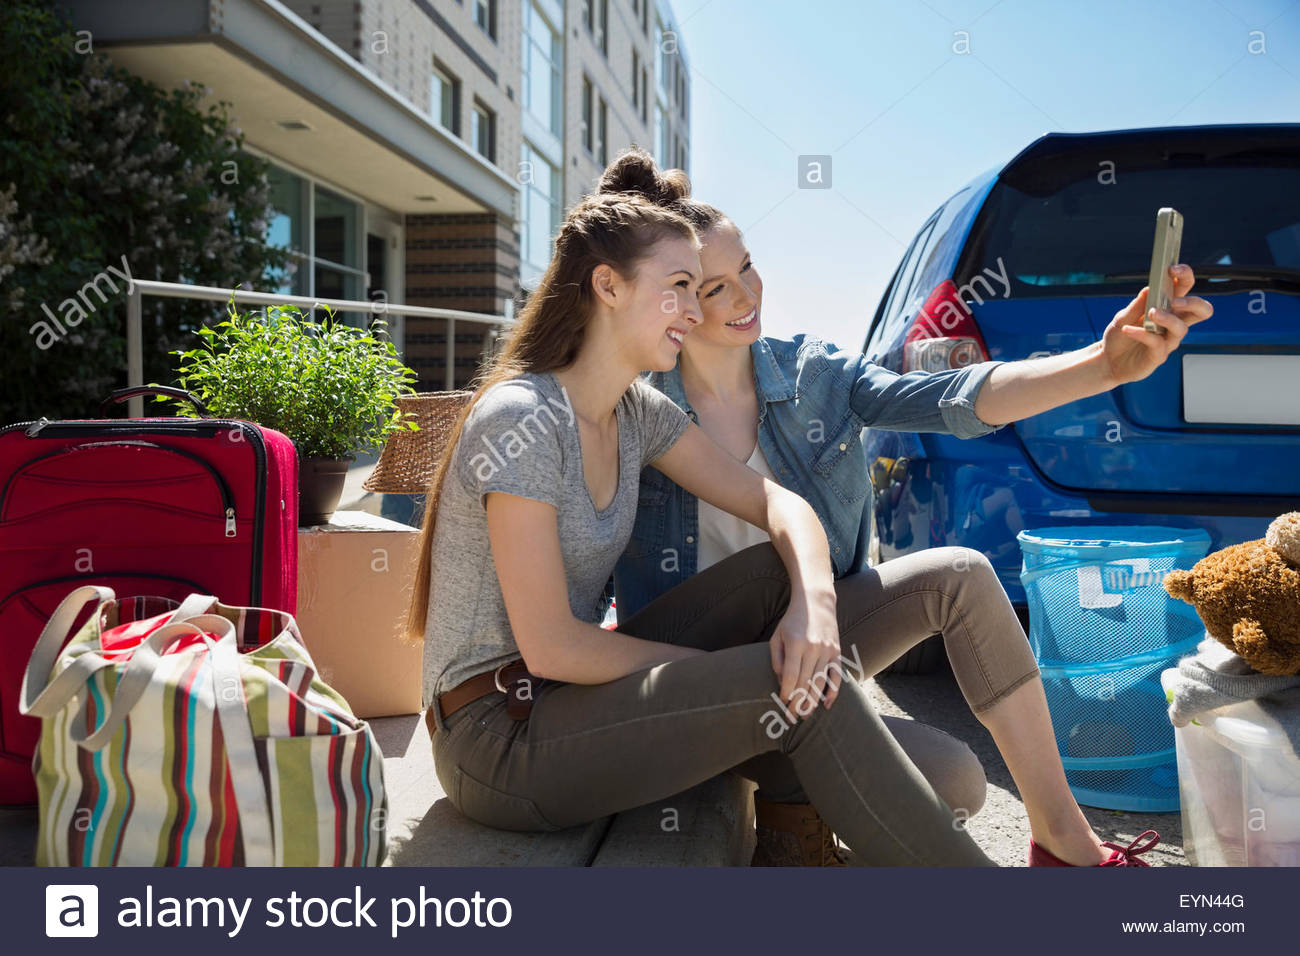 College students taking selfie moving into college dorm Stock Photo